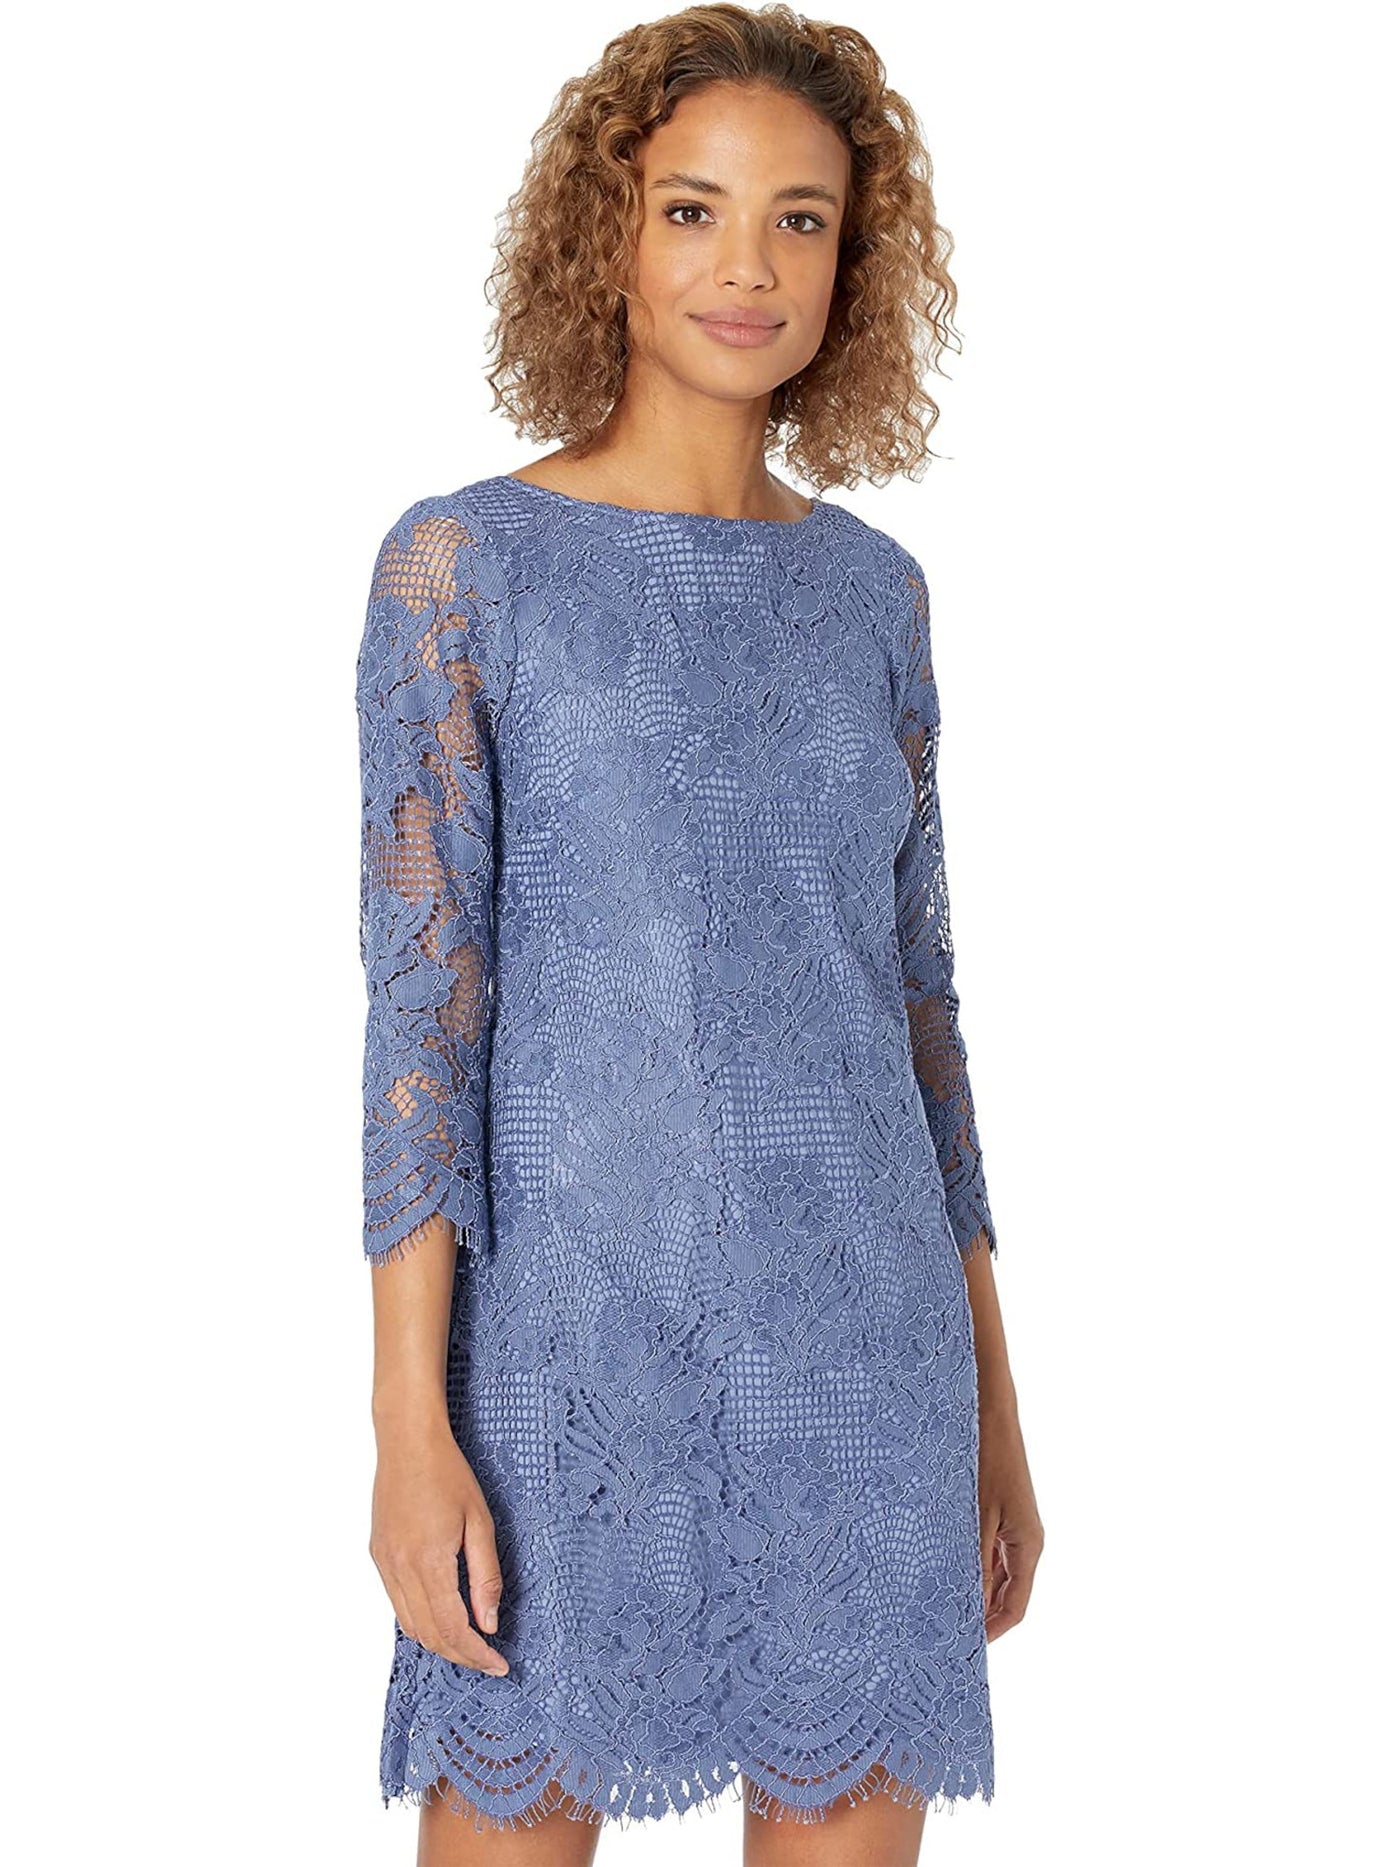 VINCE CAMUTO Womens Blue Zippered Scalloped Lace Lined V-back 3/4 Sleeve Boat Neck Short Cocktail Shift Dress 10